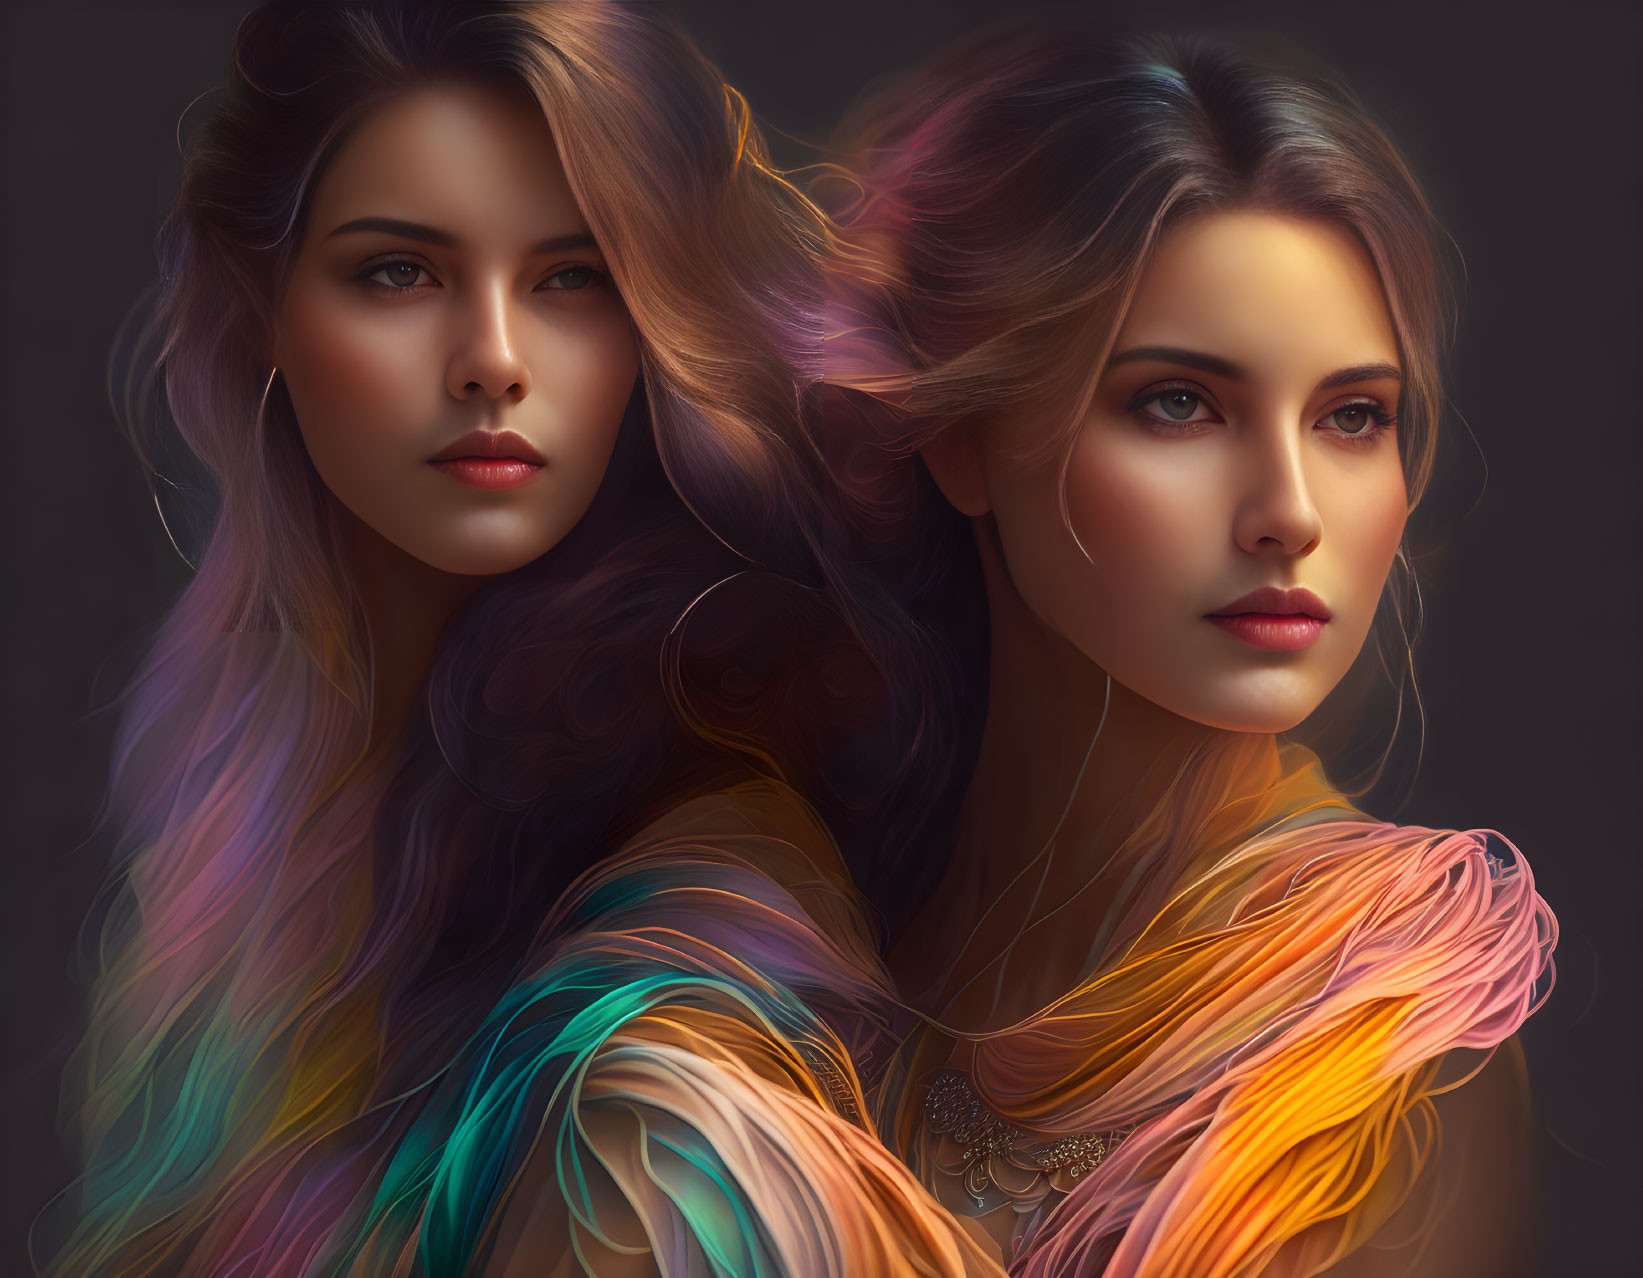 Vibrant multicolored hair on two women against dark background